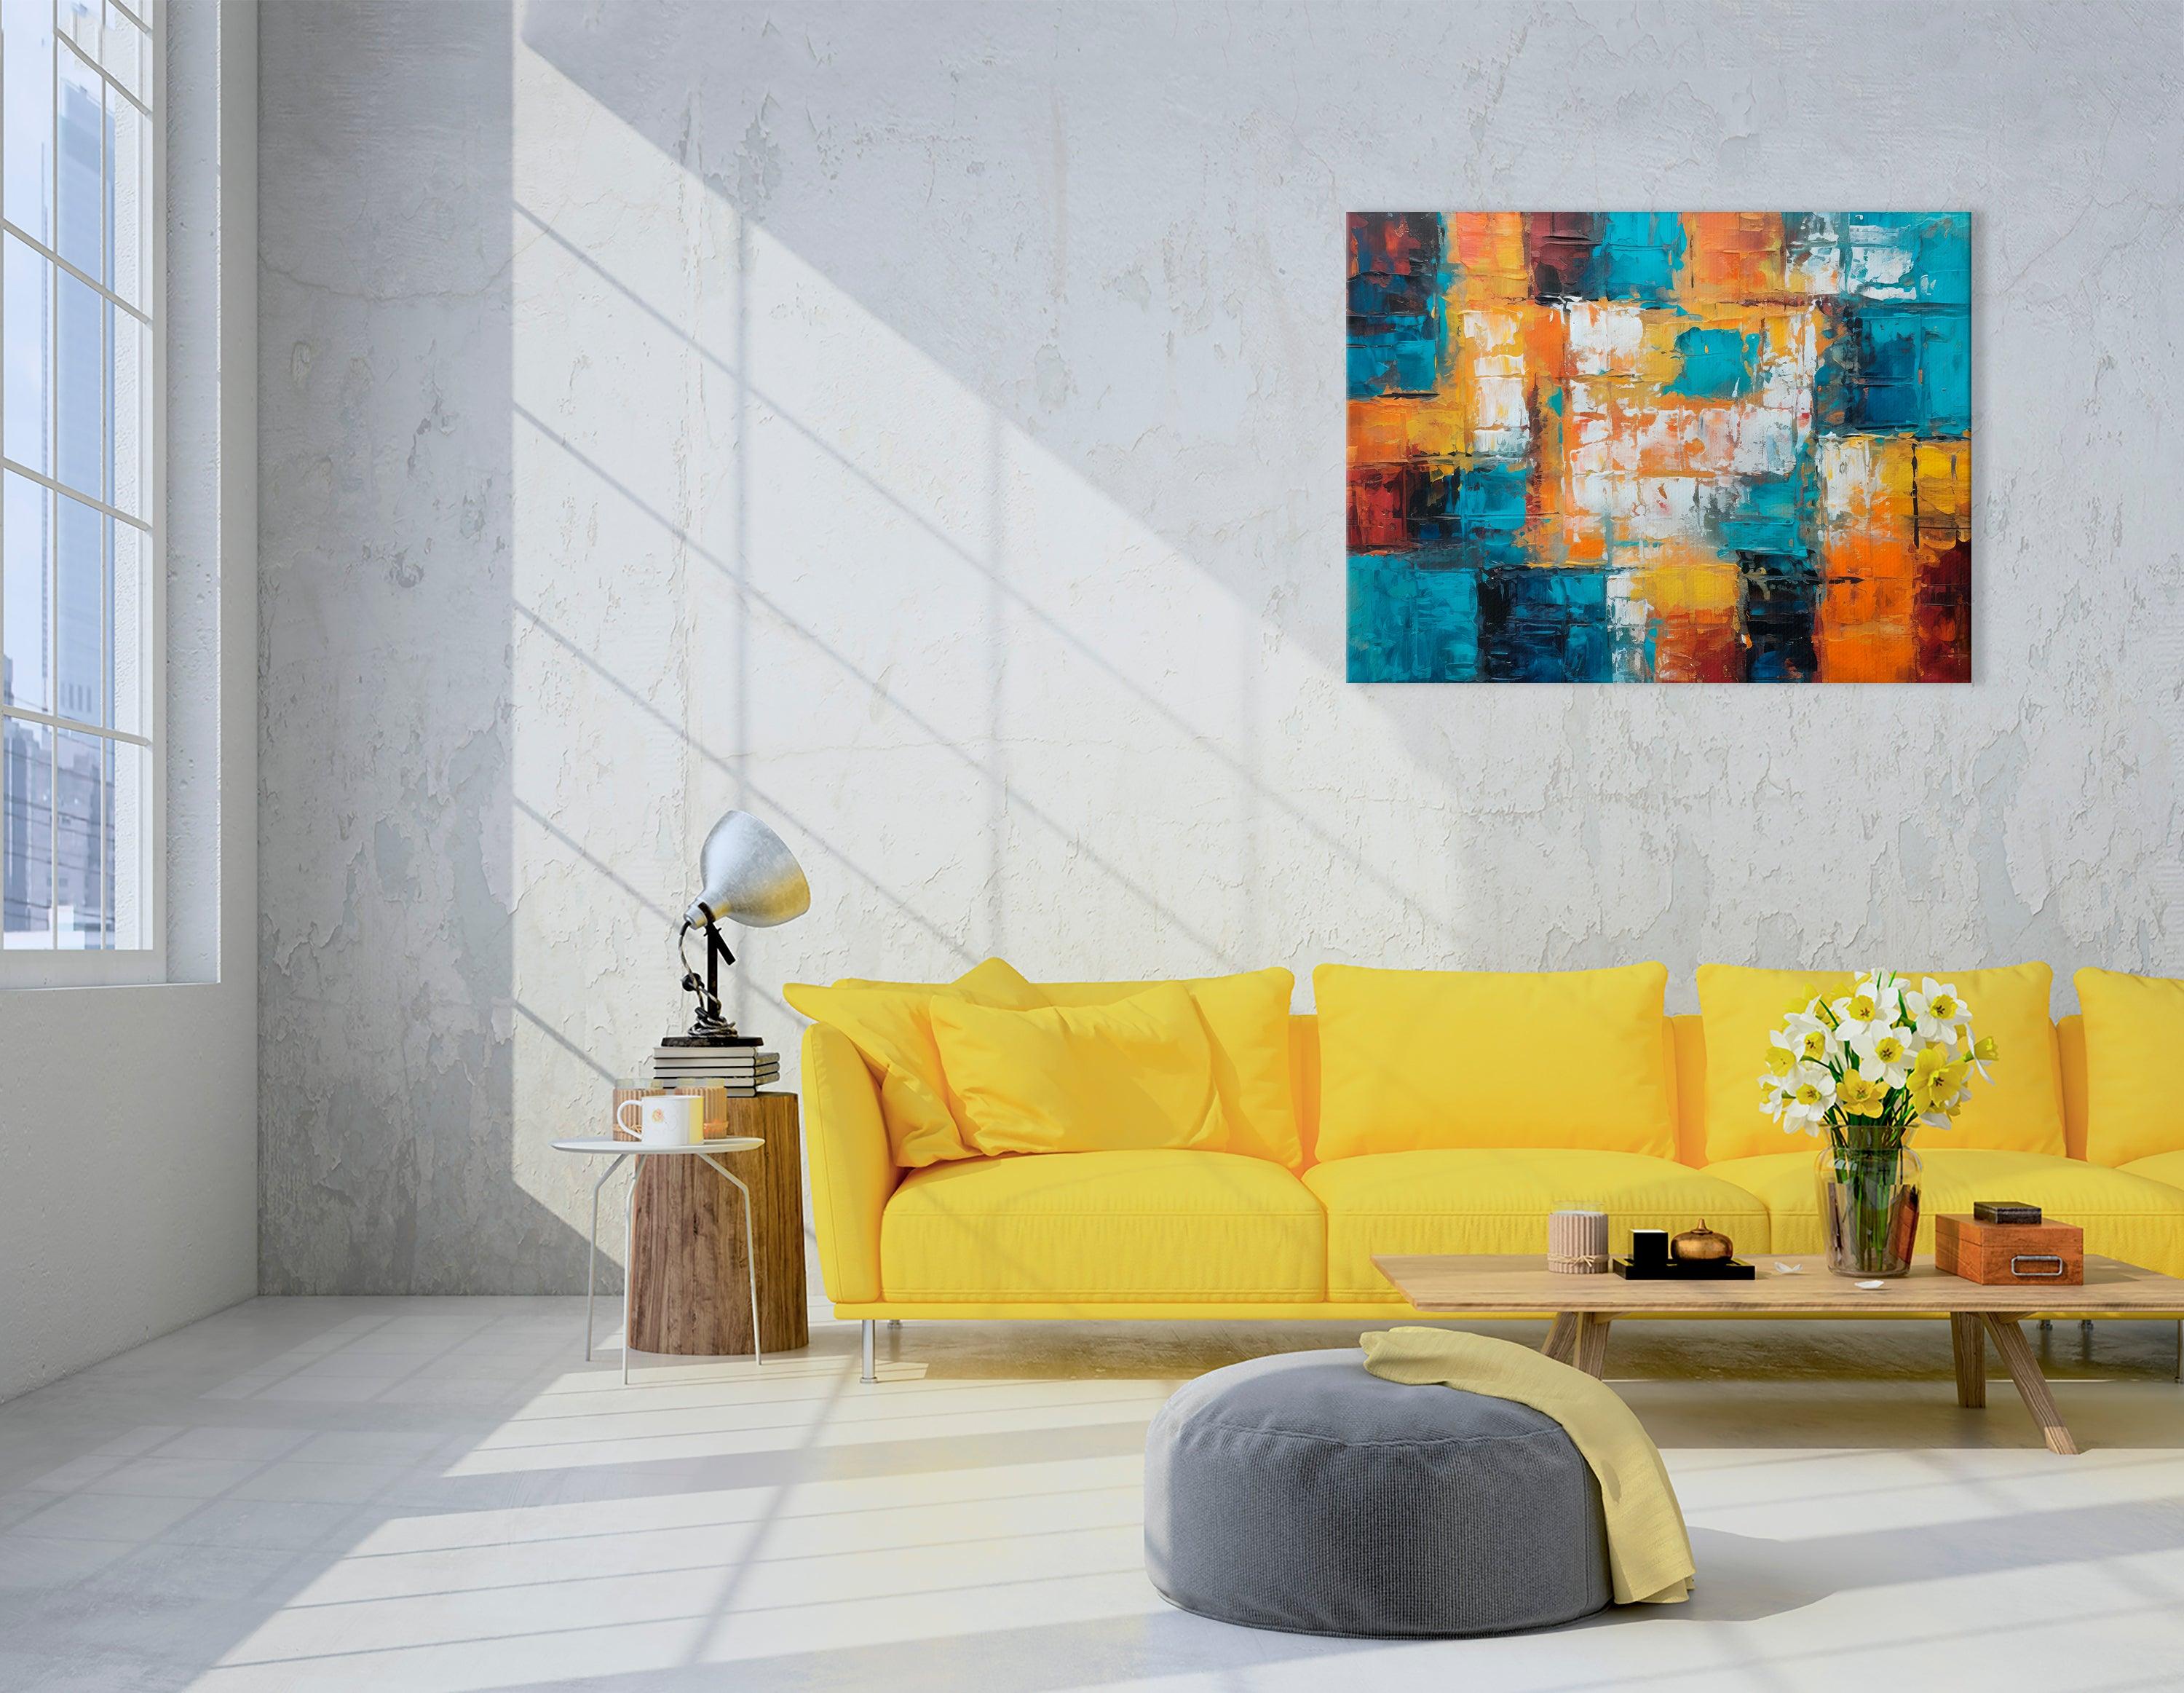 Abstract Cubism Fusion of Turquoise & Orange - Canvas Print - Artoholica Ready to Hang Canvas Print